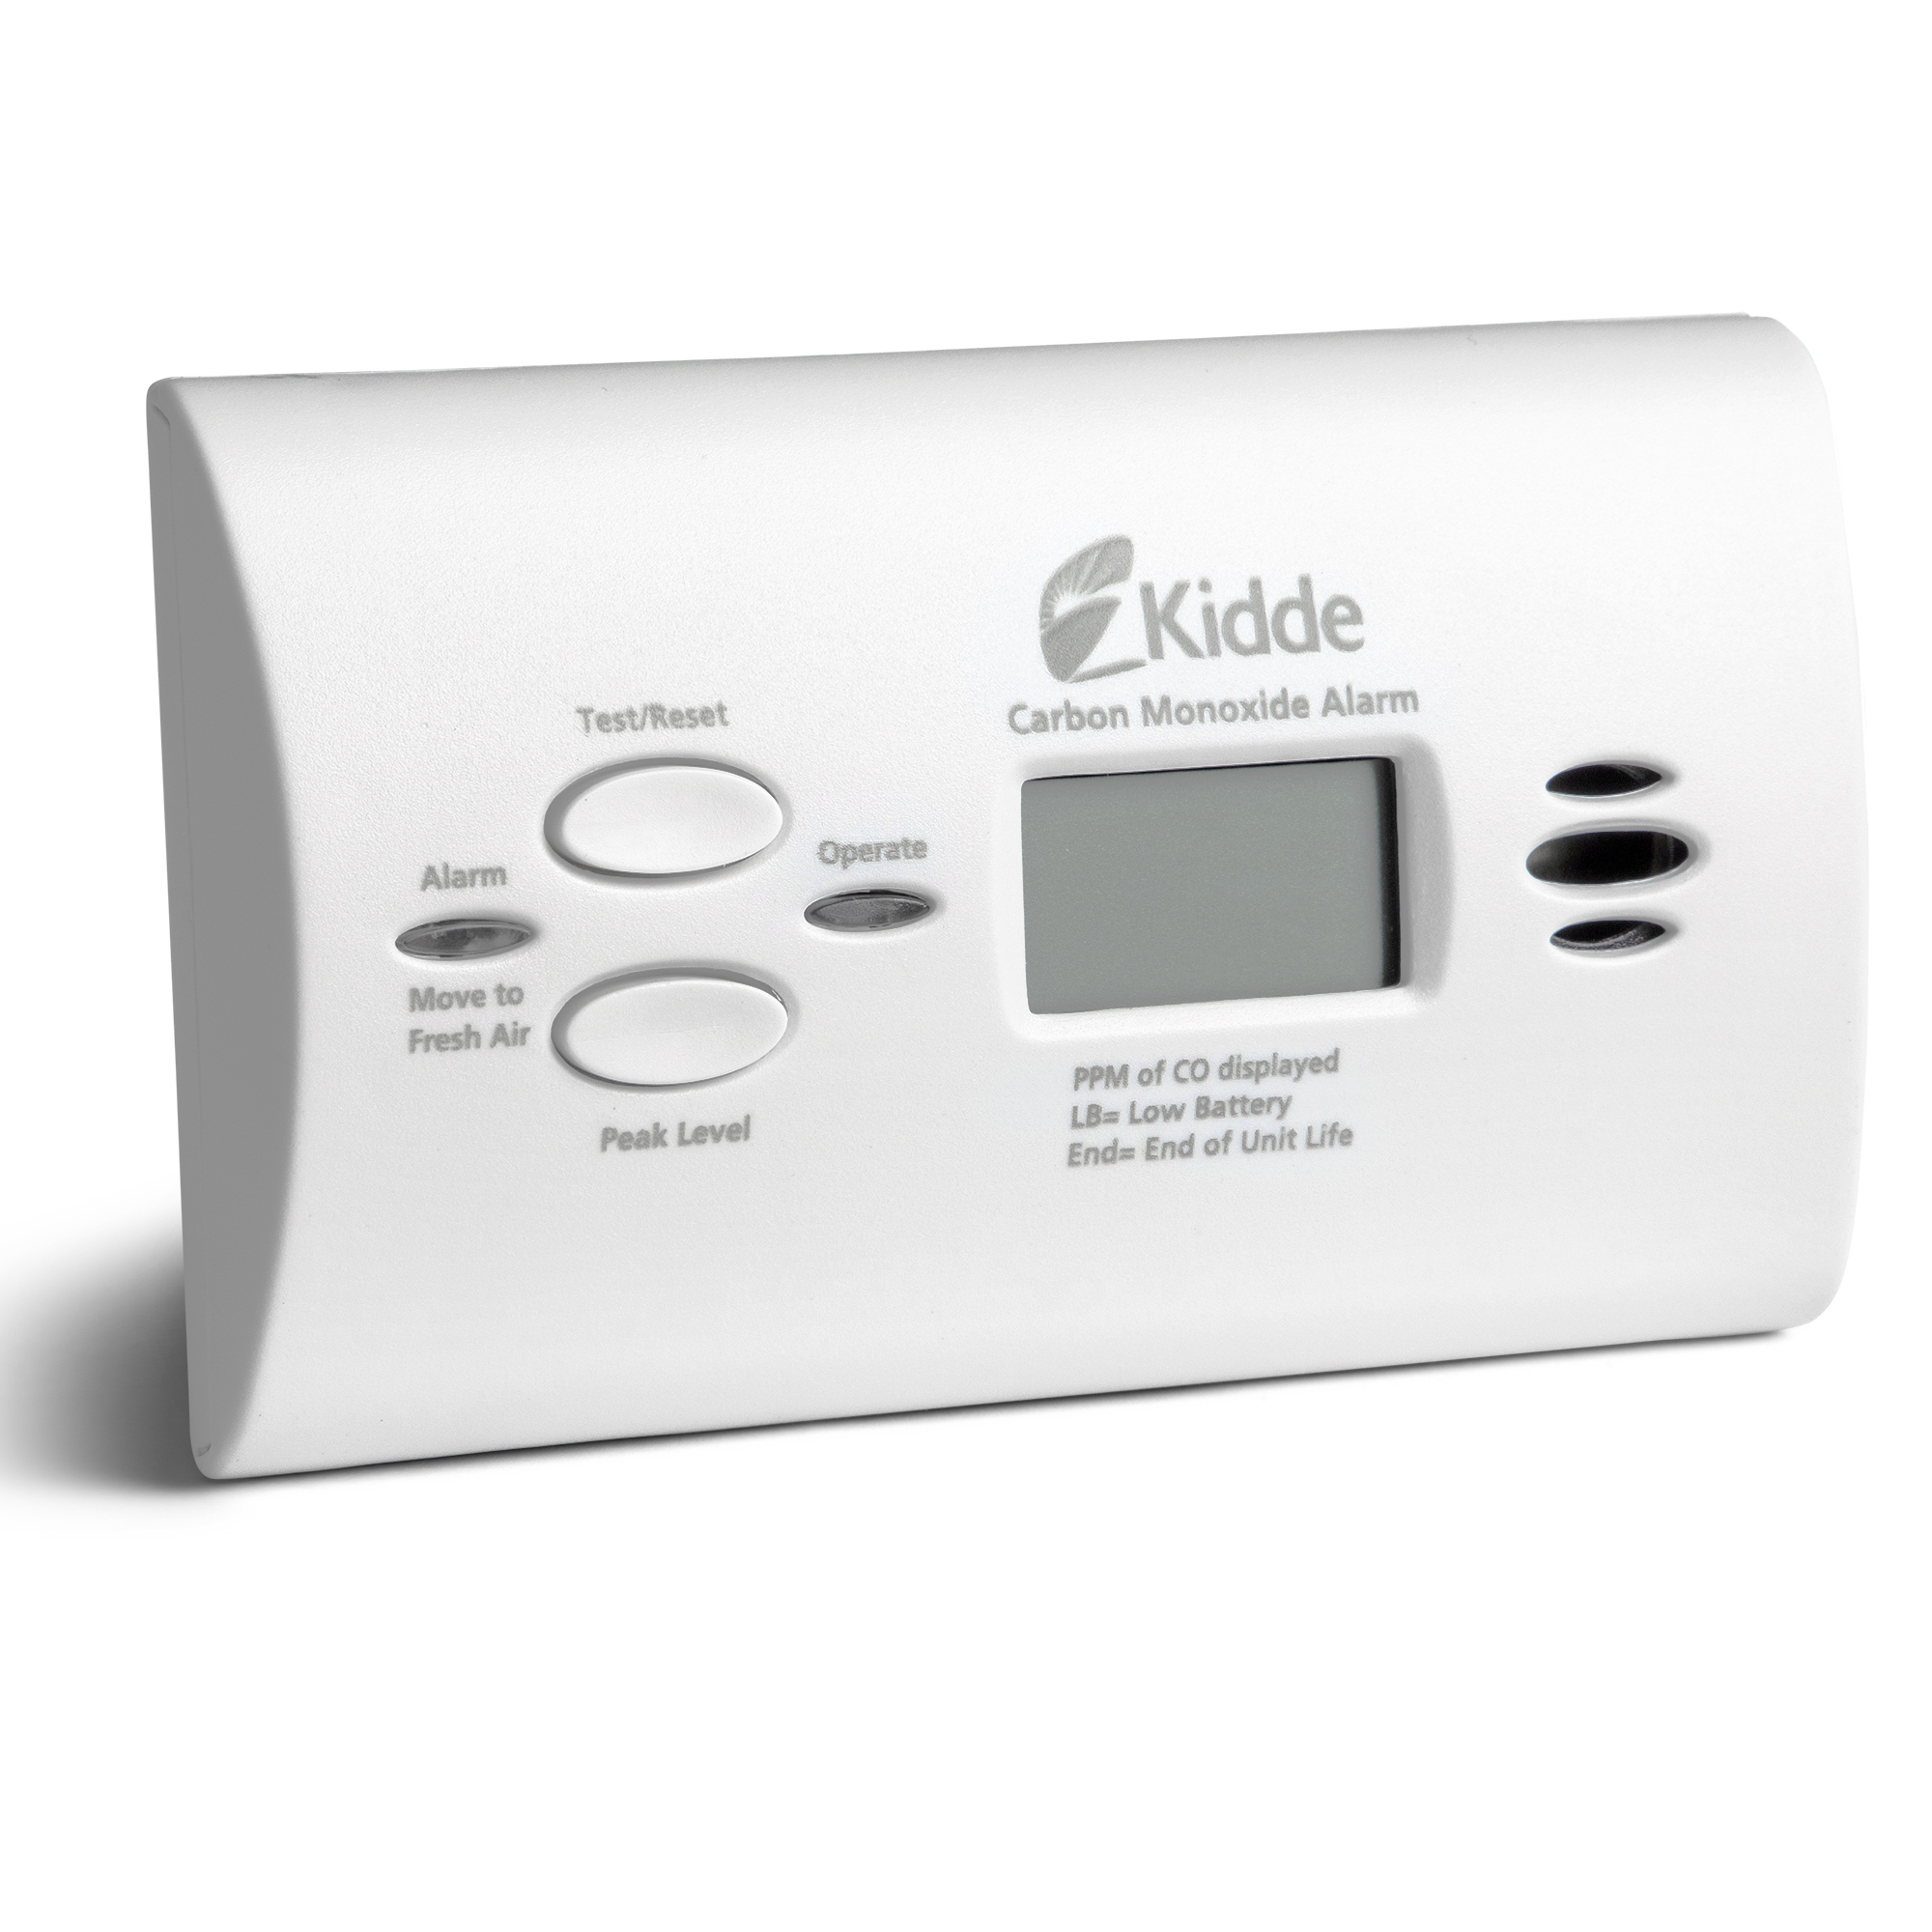 Kidde Battery Operated Carbon Monoxide Alarm with Digital Display KN-COPP-B-LPM - image 1 of 9